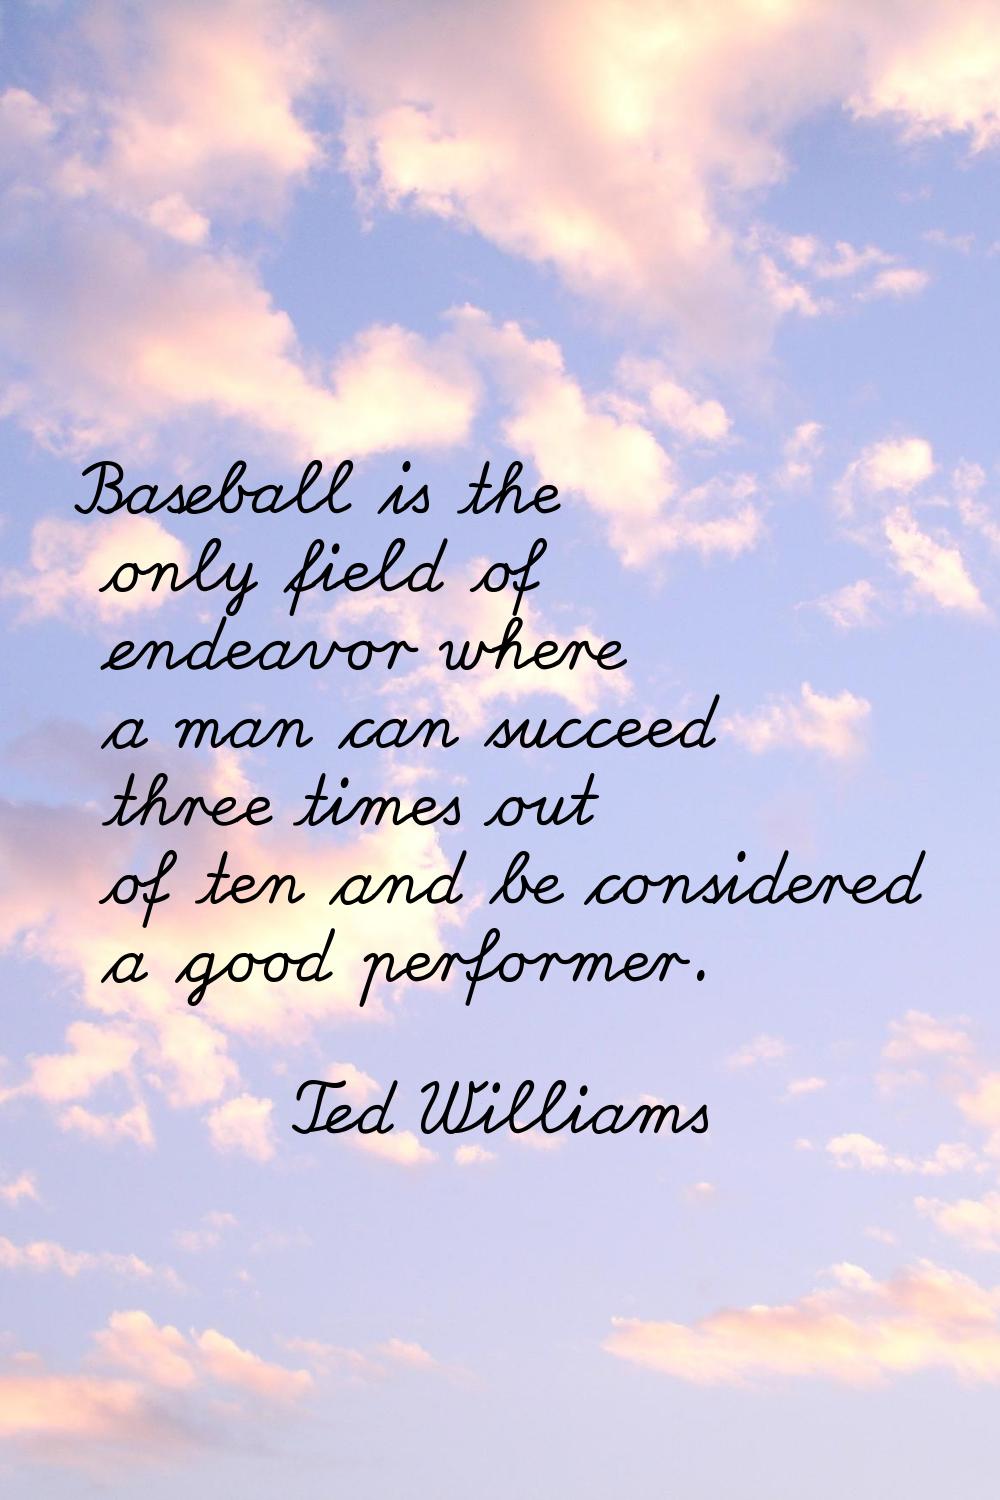 Baseball is the only field of endeavor where a man can succeed three times out of ten and be consid